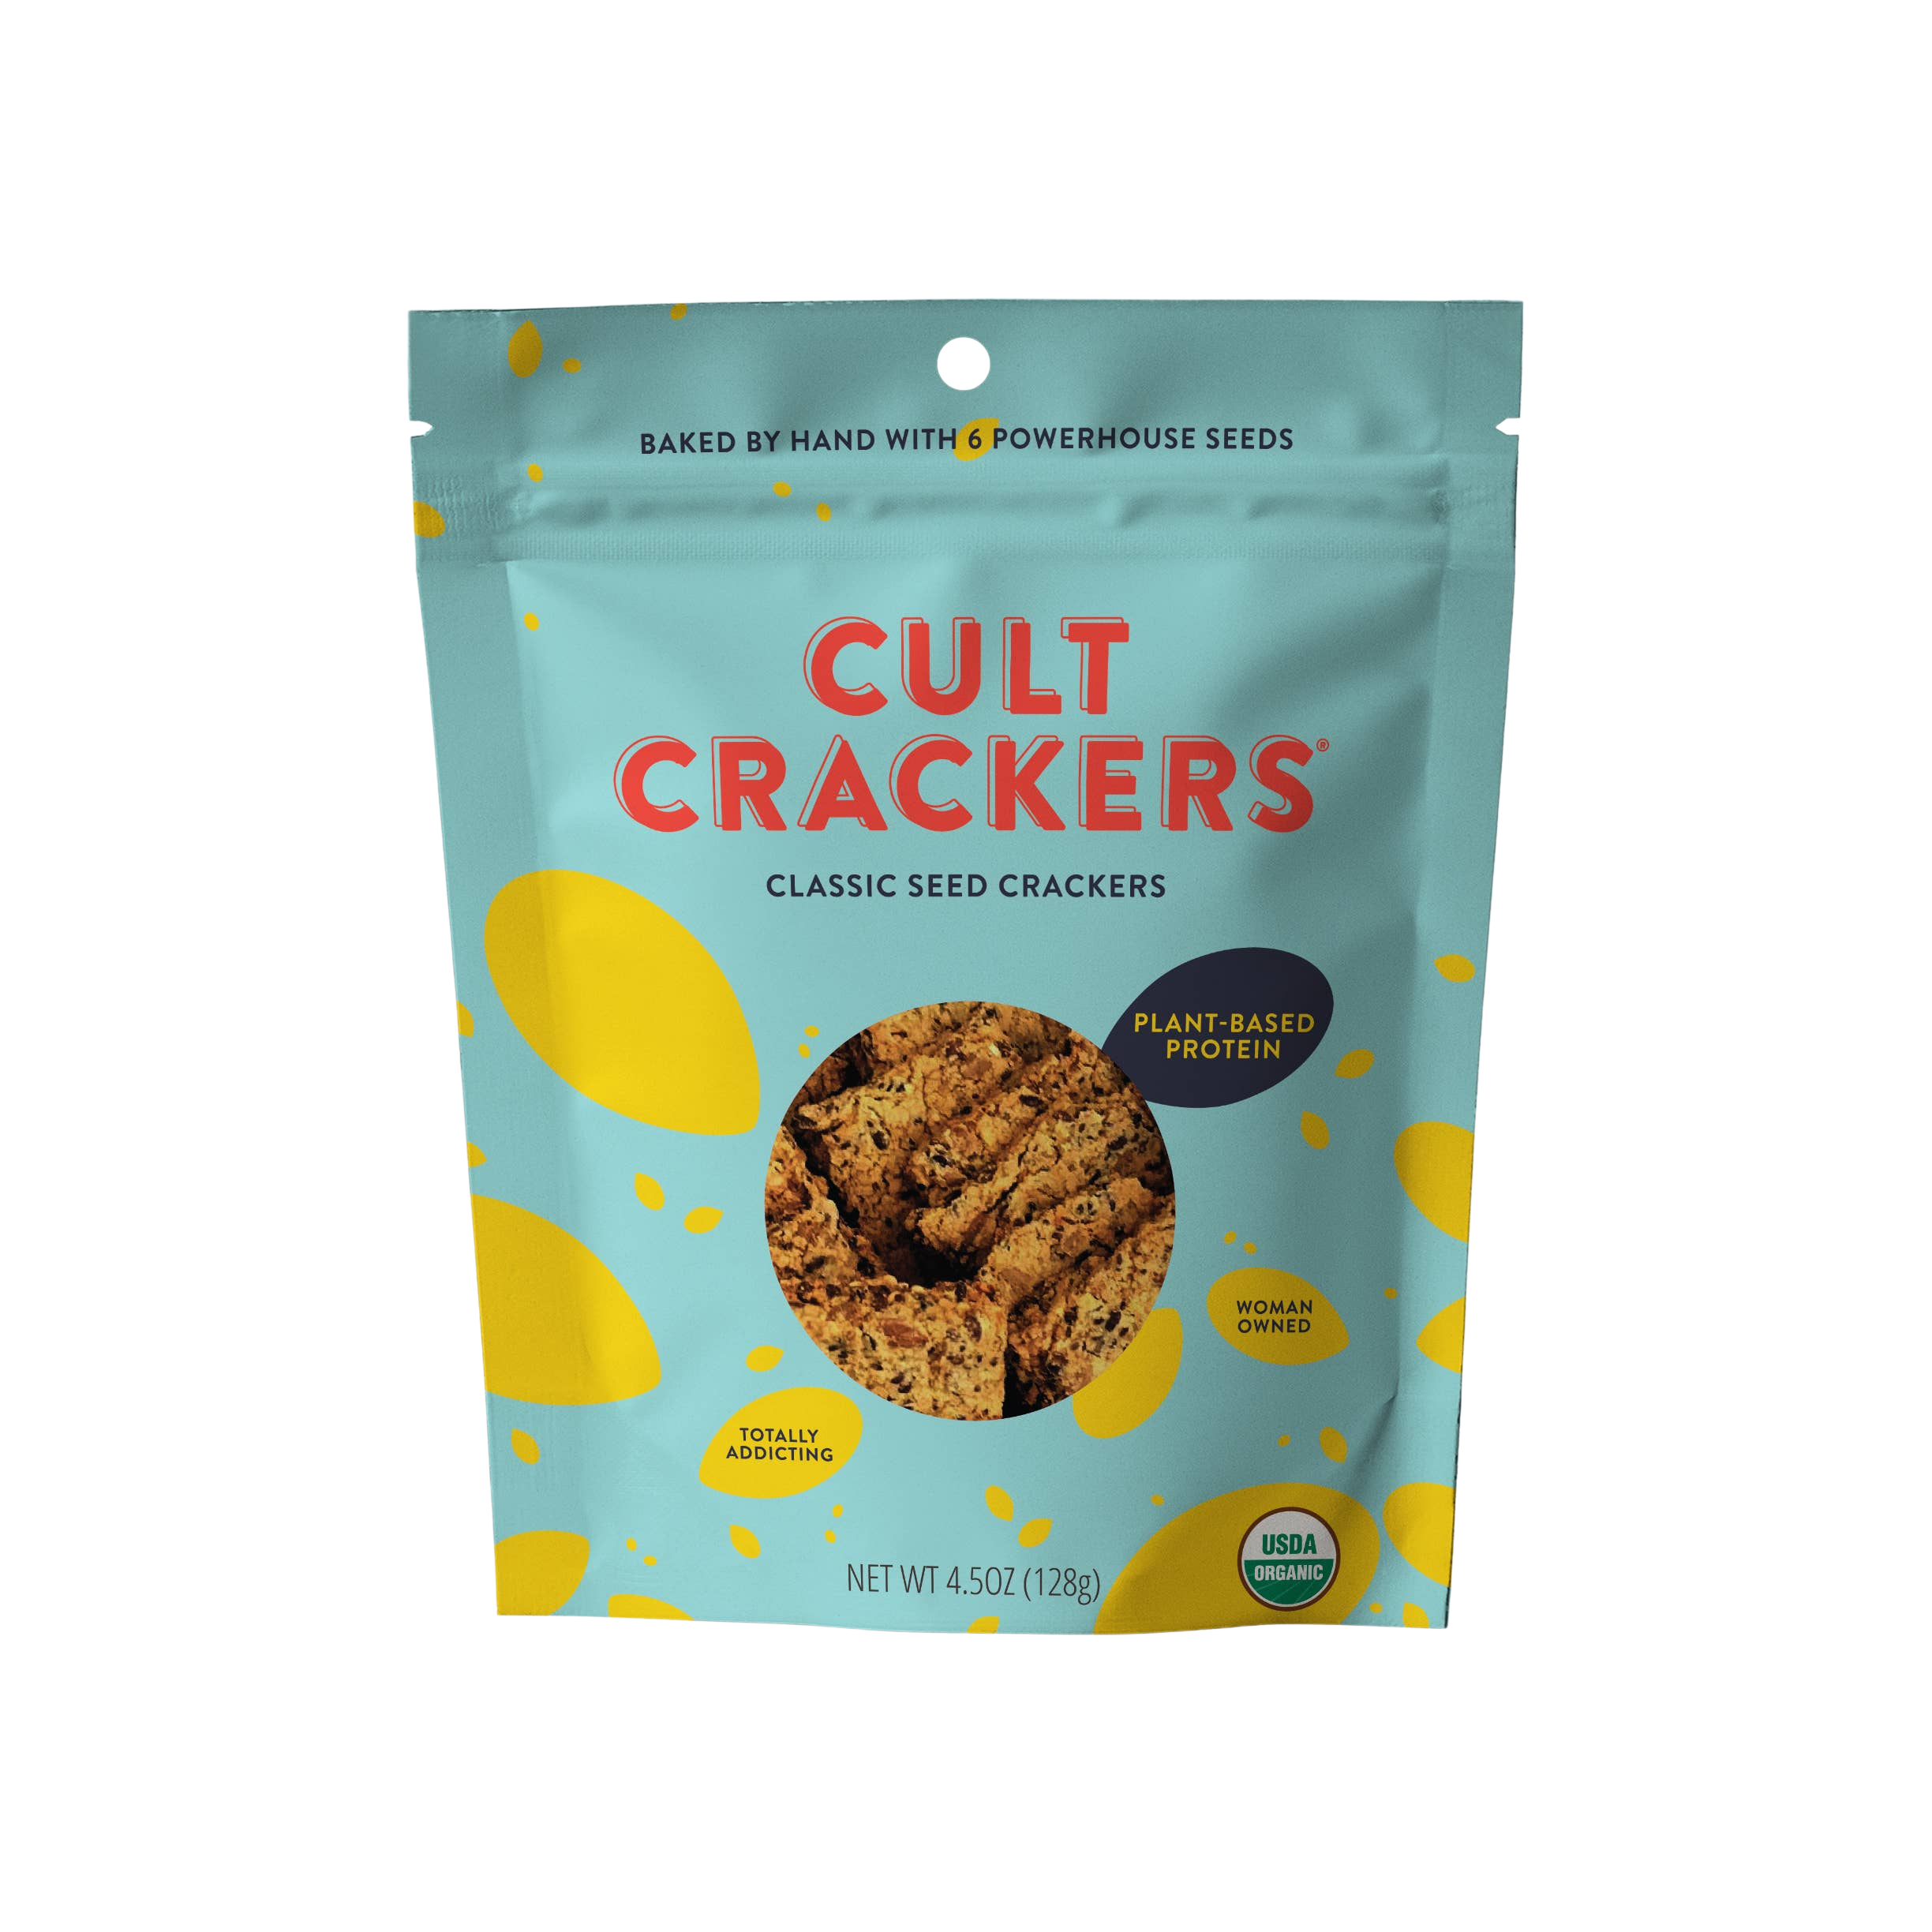 Cult Crackers: Classic Seed